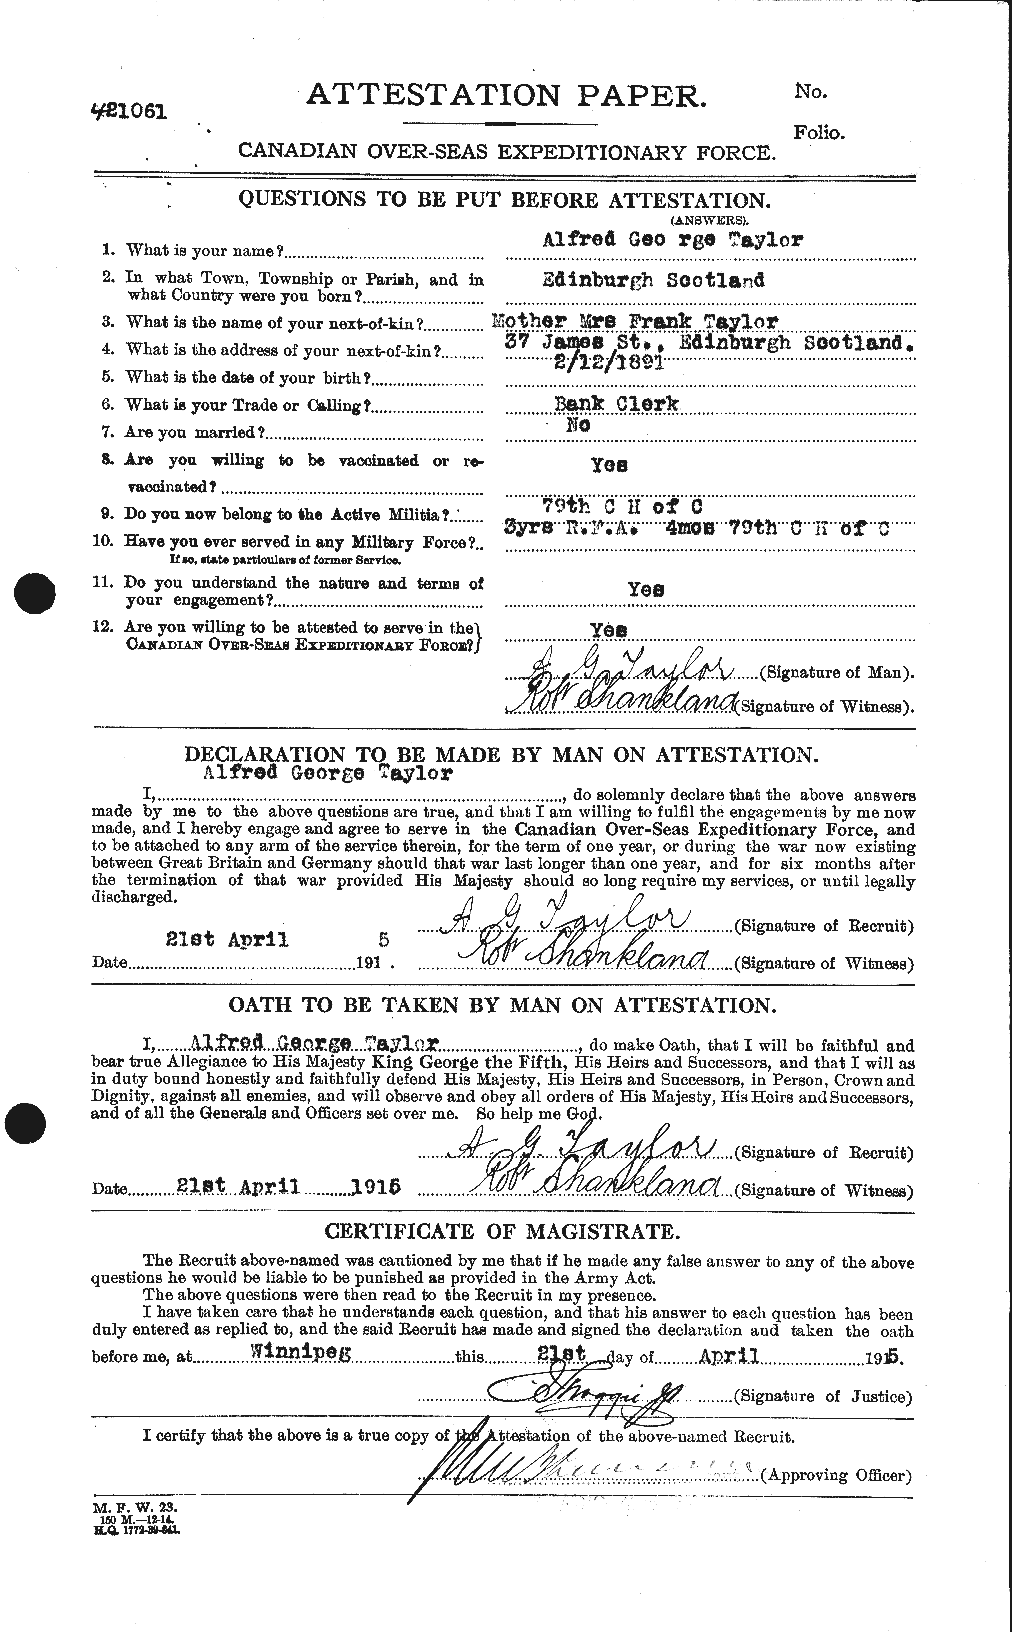 Personnel Records of the First World War - CEF 626187a